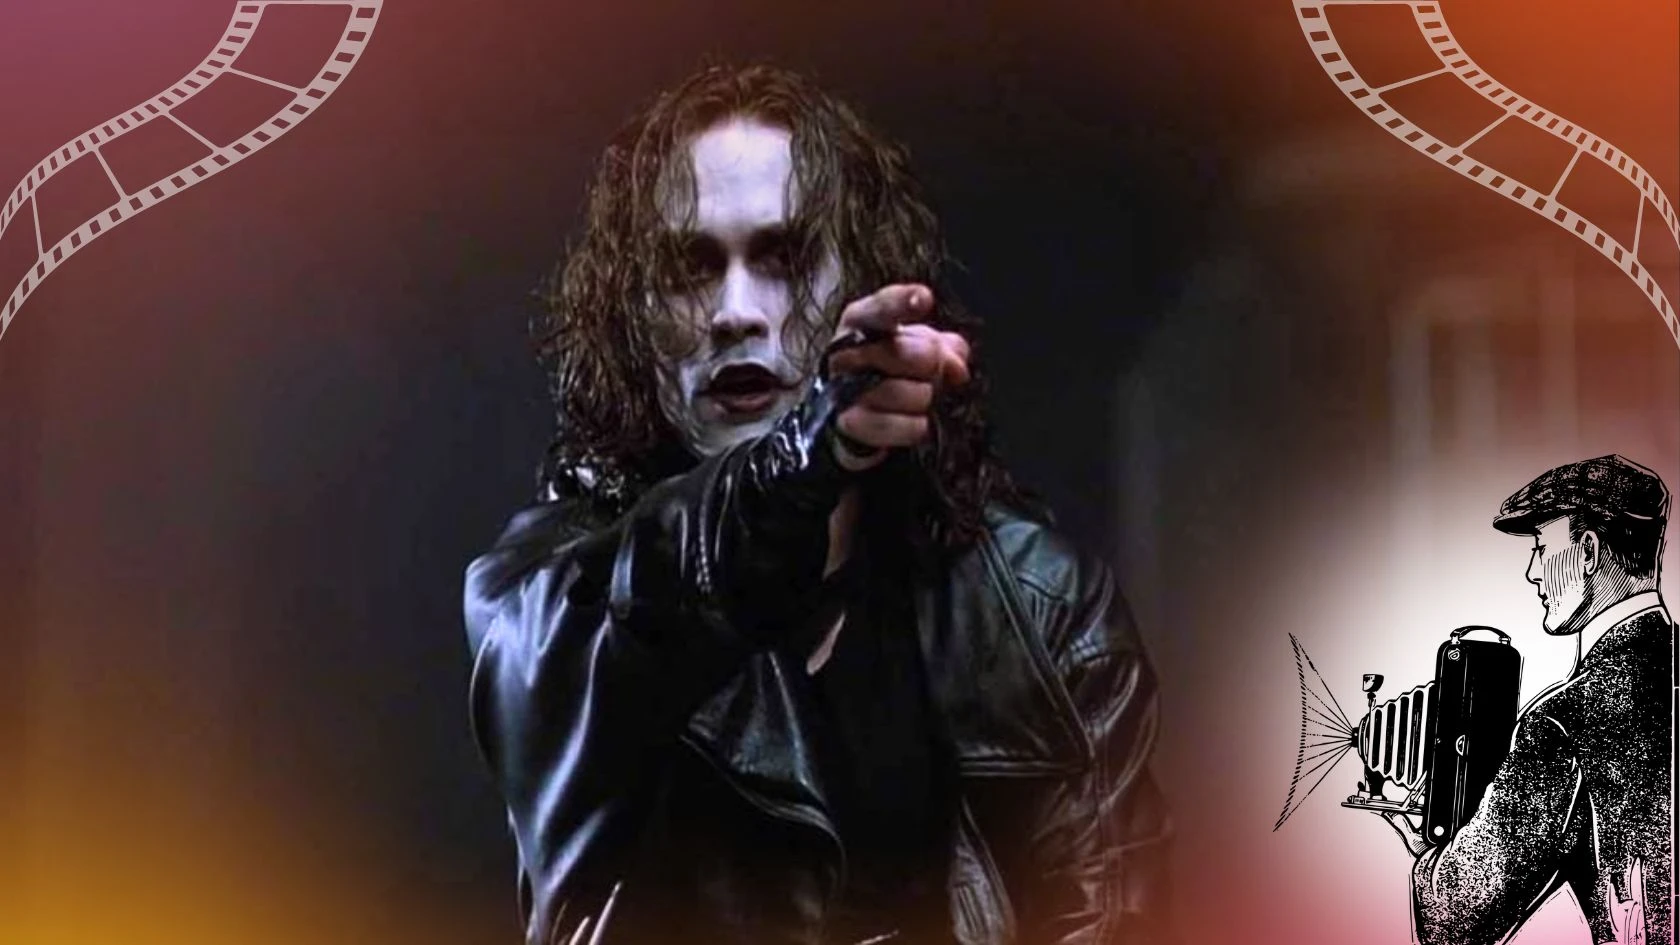 How Did They Finish Filming The Crow